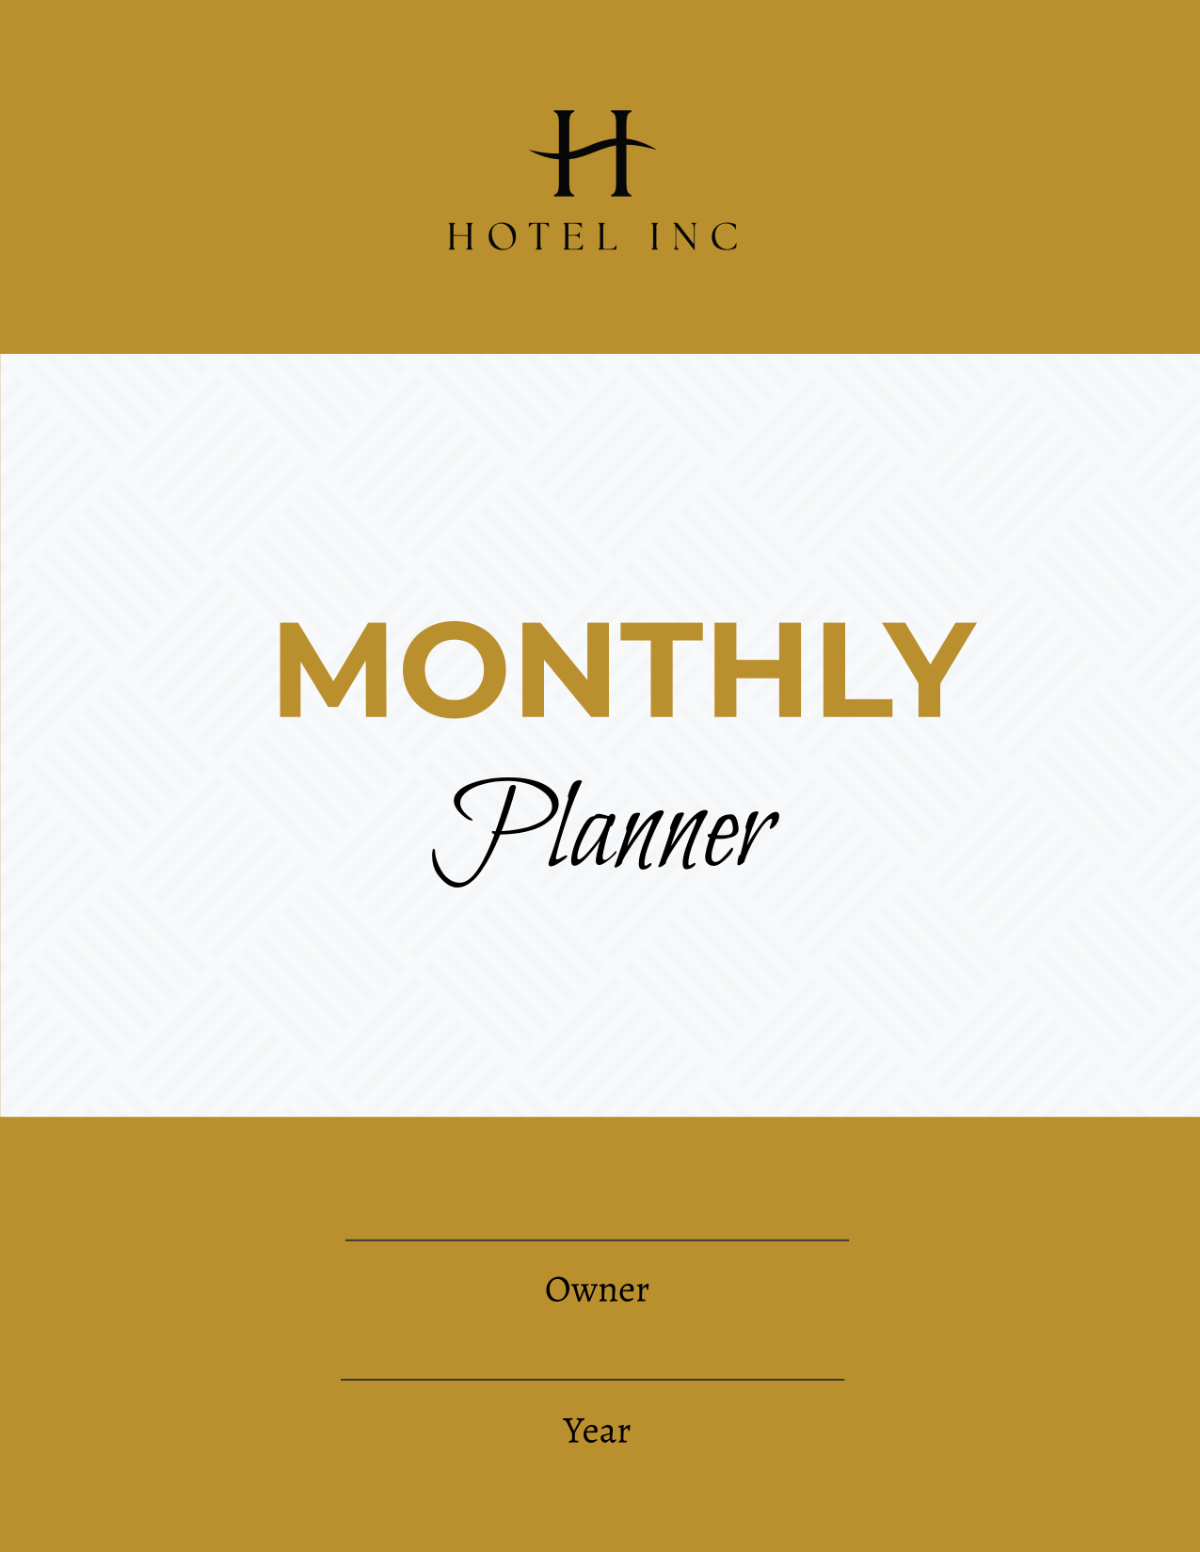 Hotel Monthly Planner